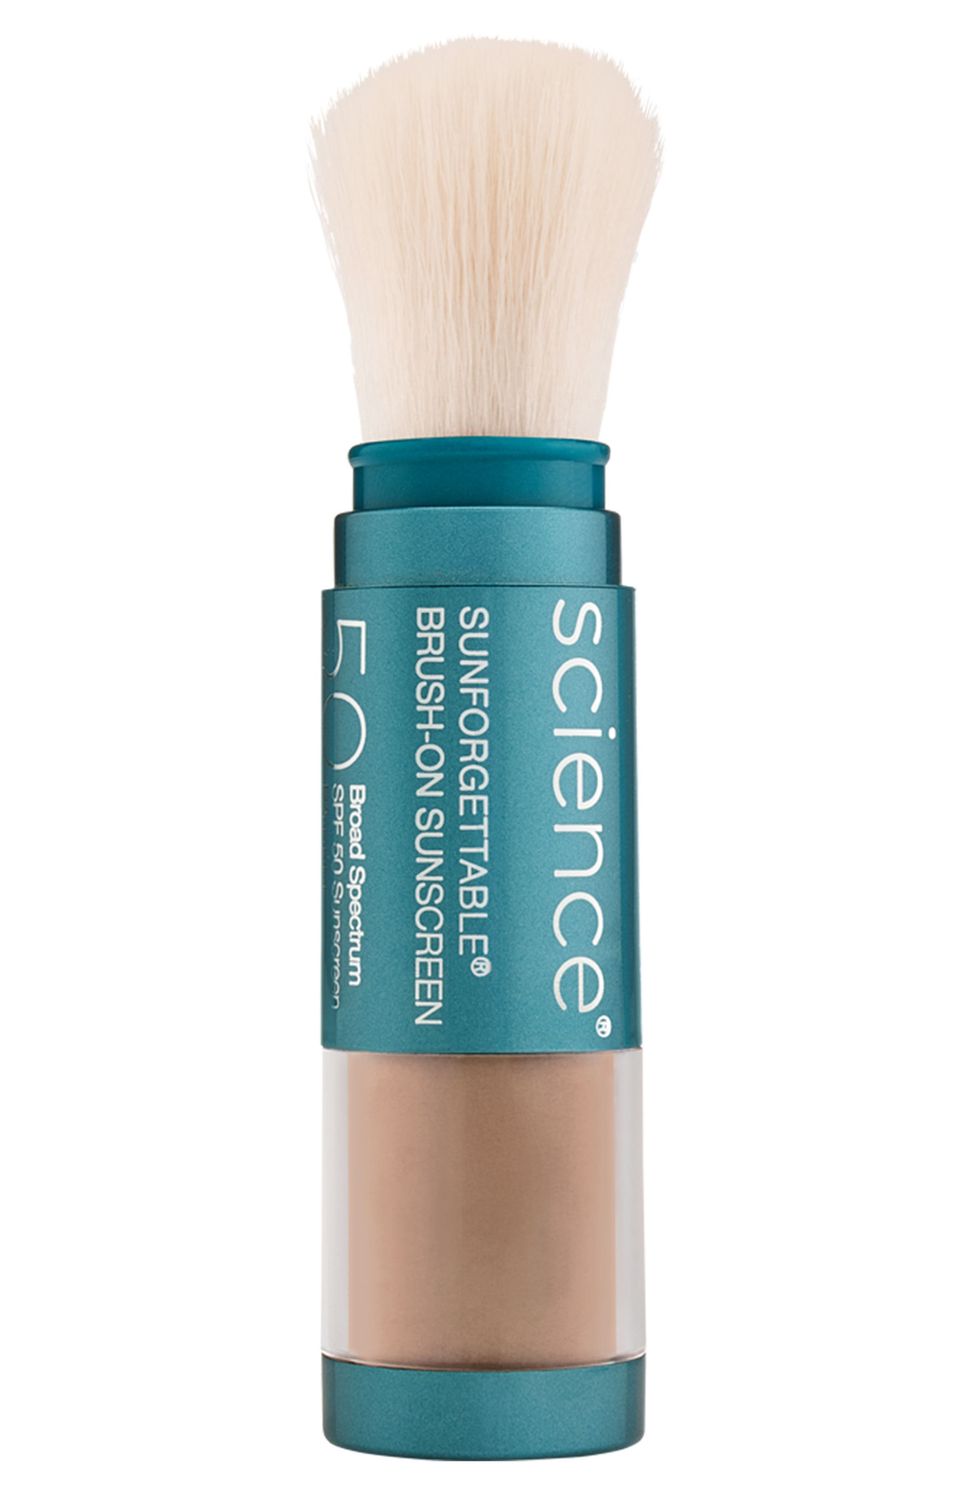 COLORESCIENCER Sunforgettable Total Protection Brush-On Sunscreen